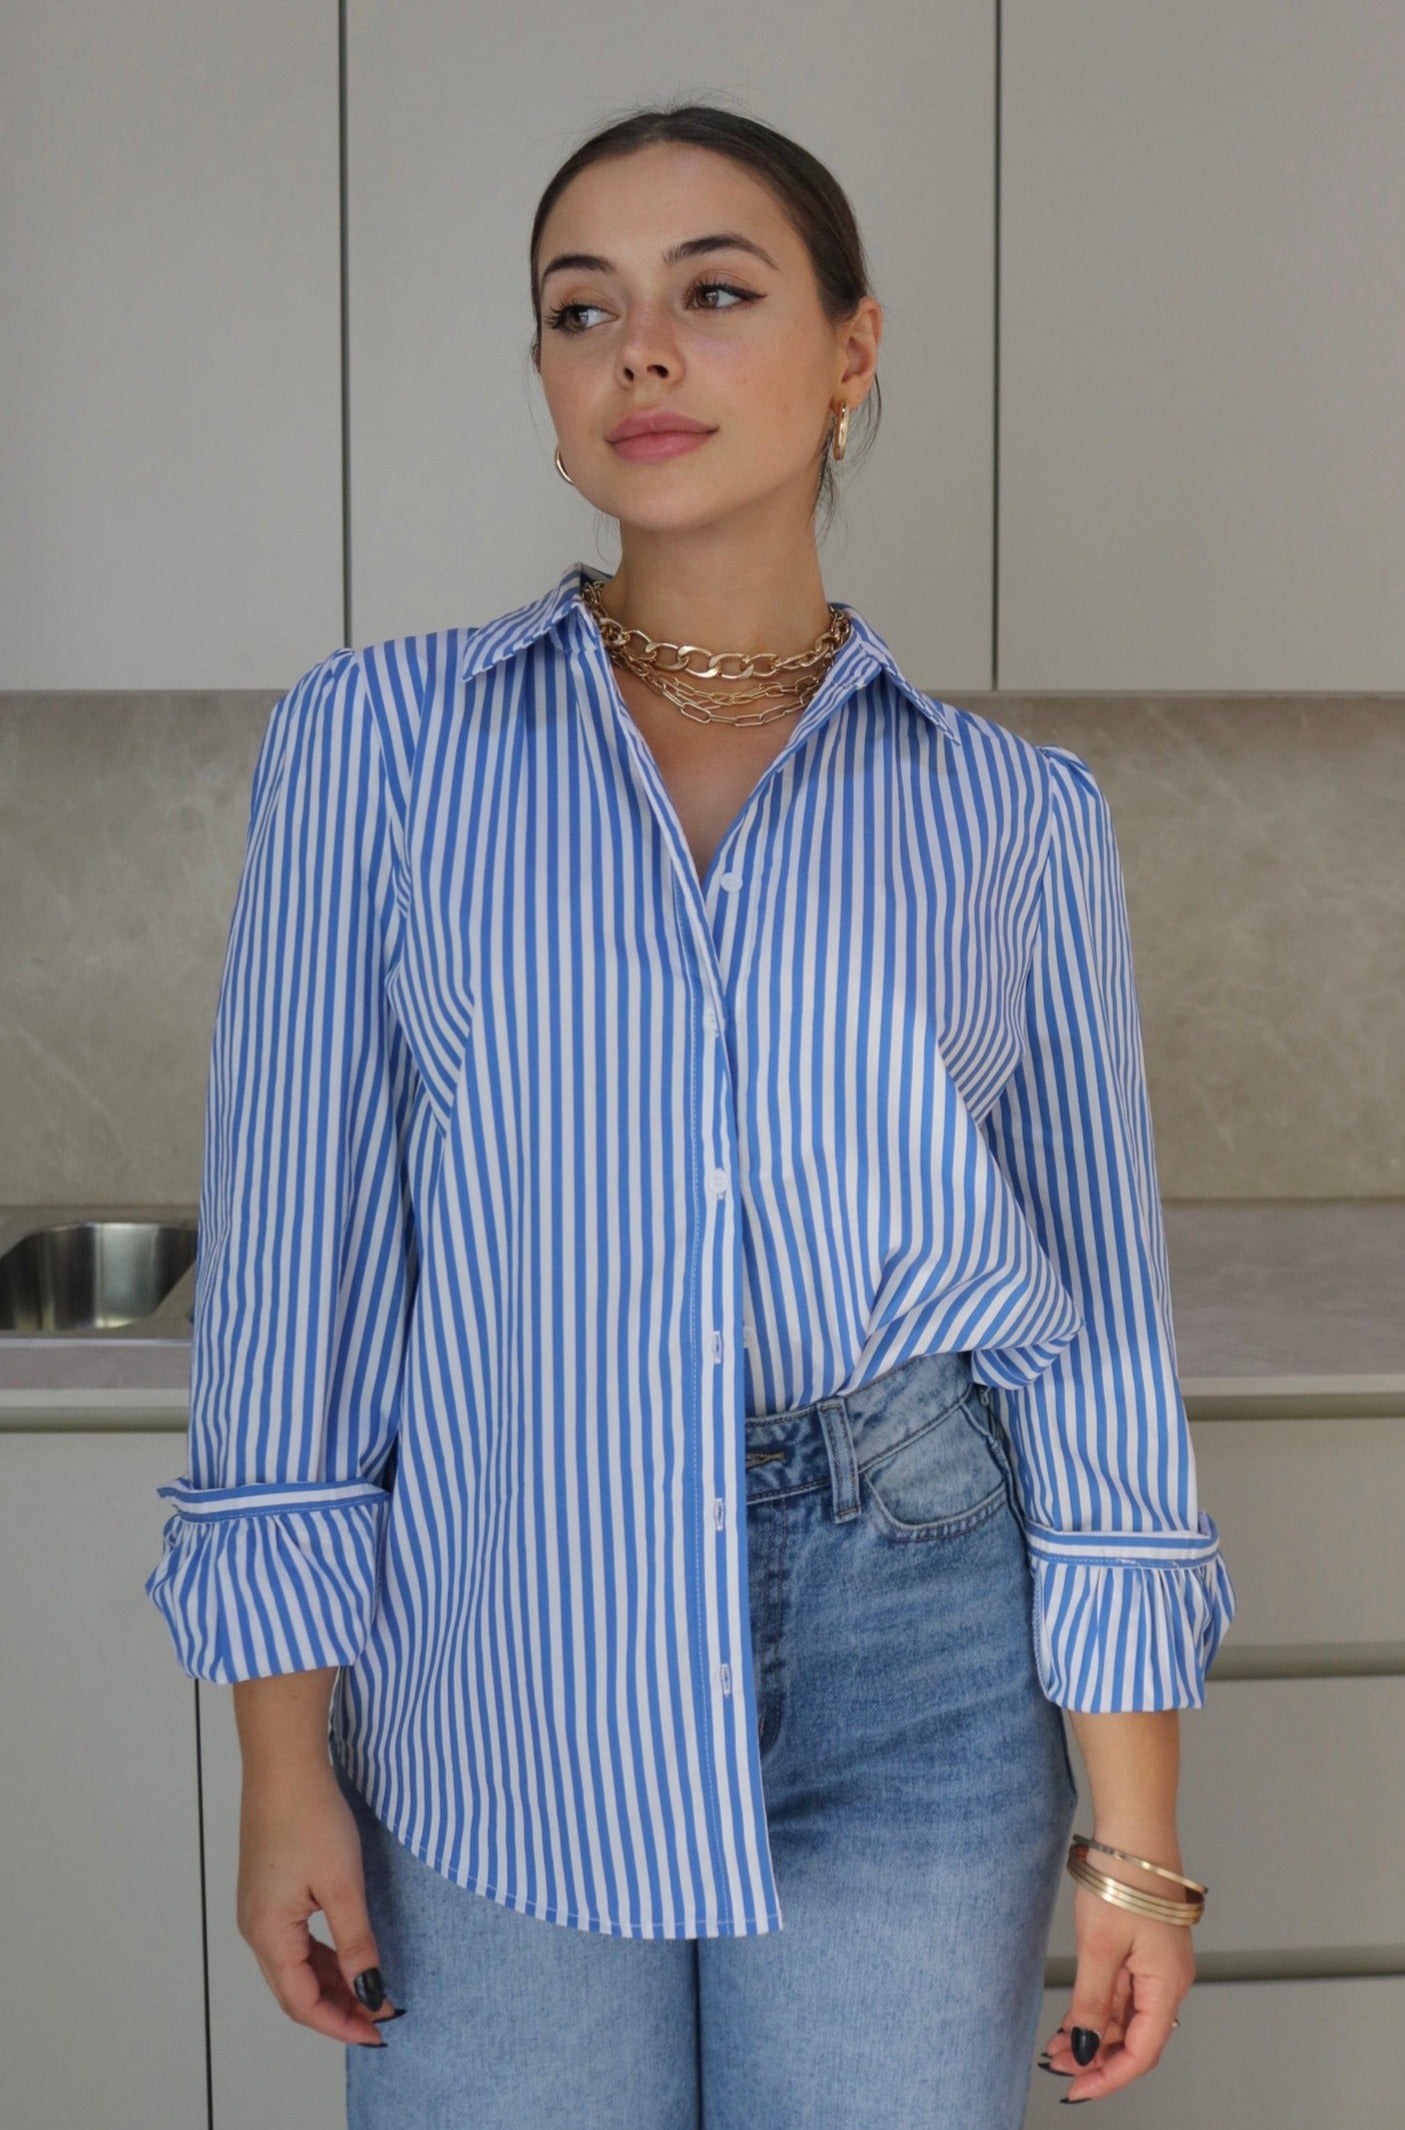 Classic Striped Button Down Shirt in Blue and White. Scarlette The Label, an online fashion boutique for women.